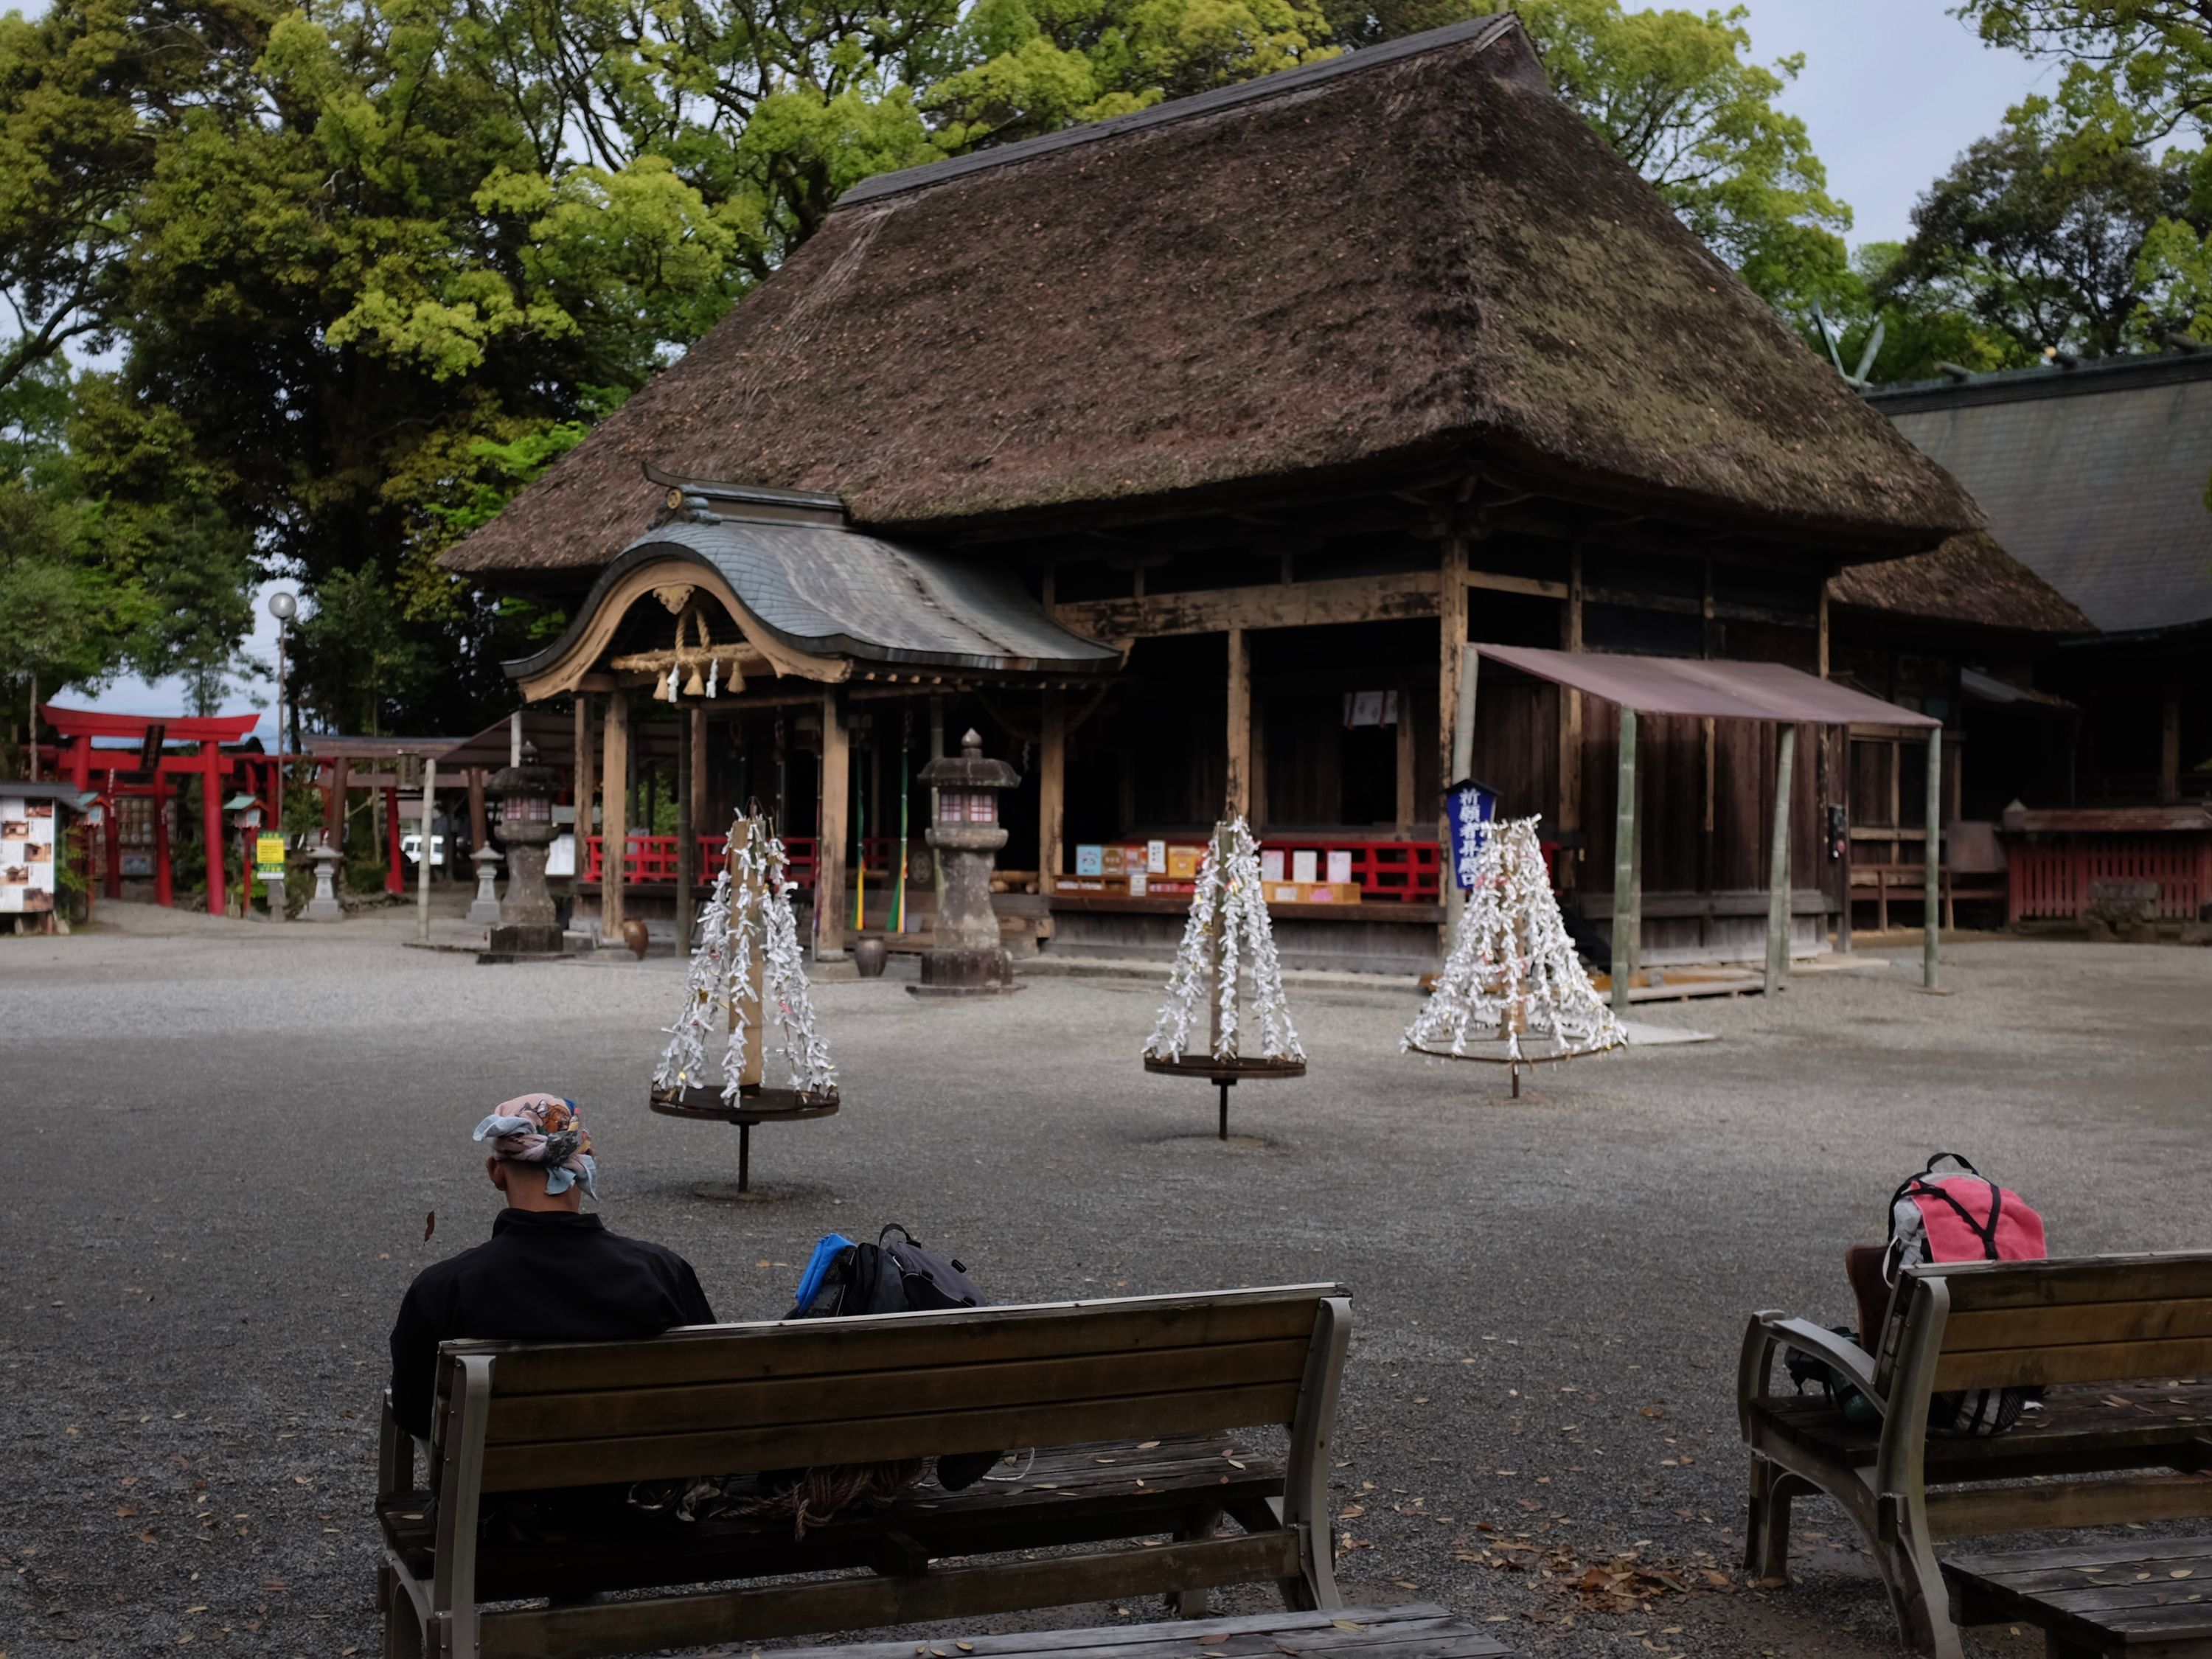 A man sits on a bench in the courtyard of a large, thatch-roofed shrine.